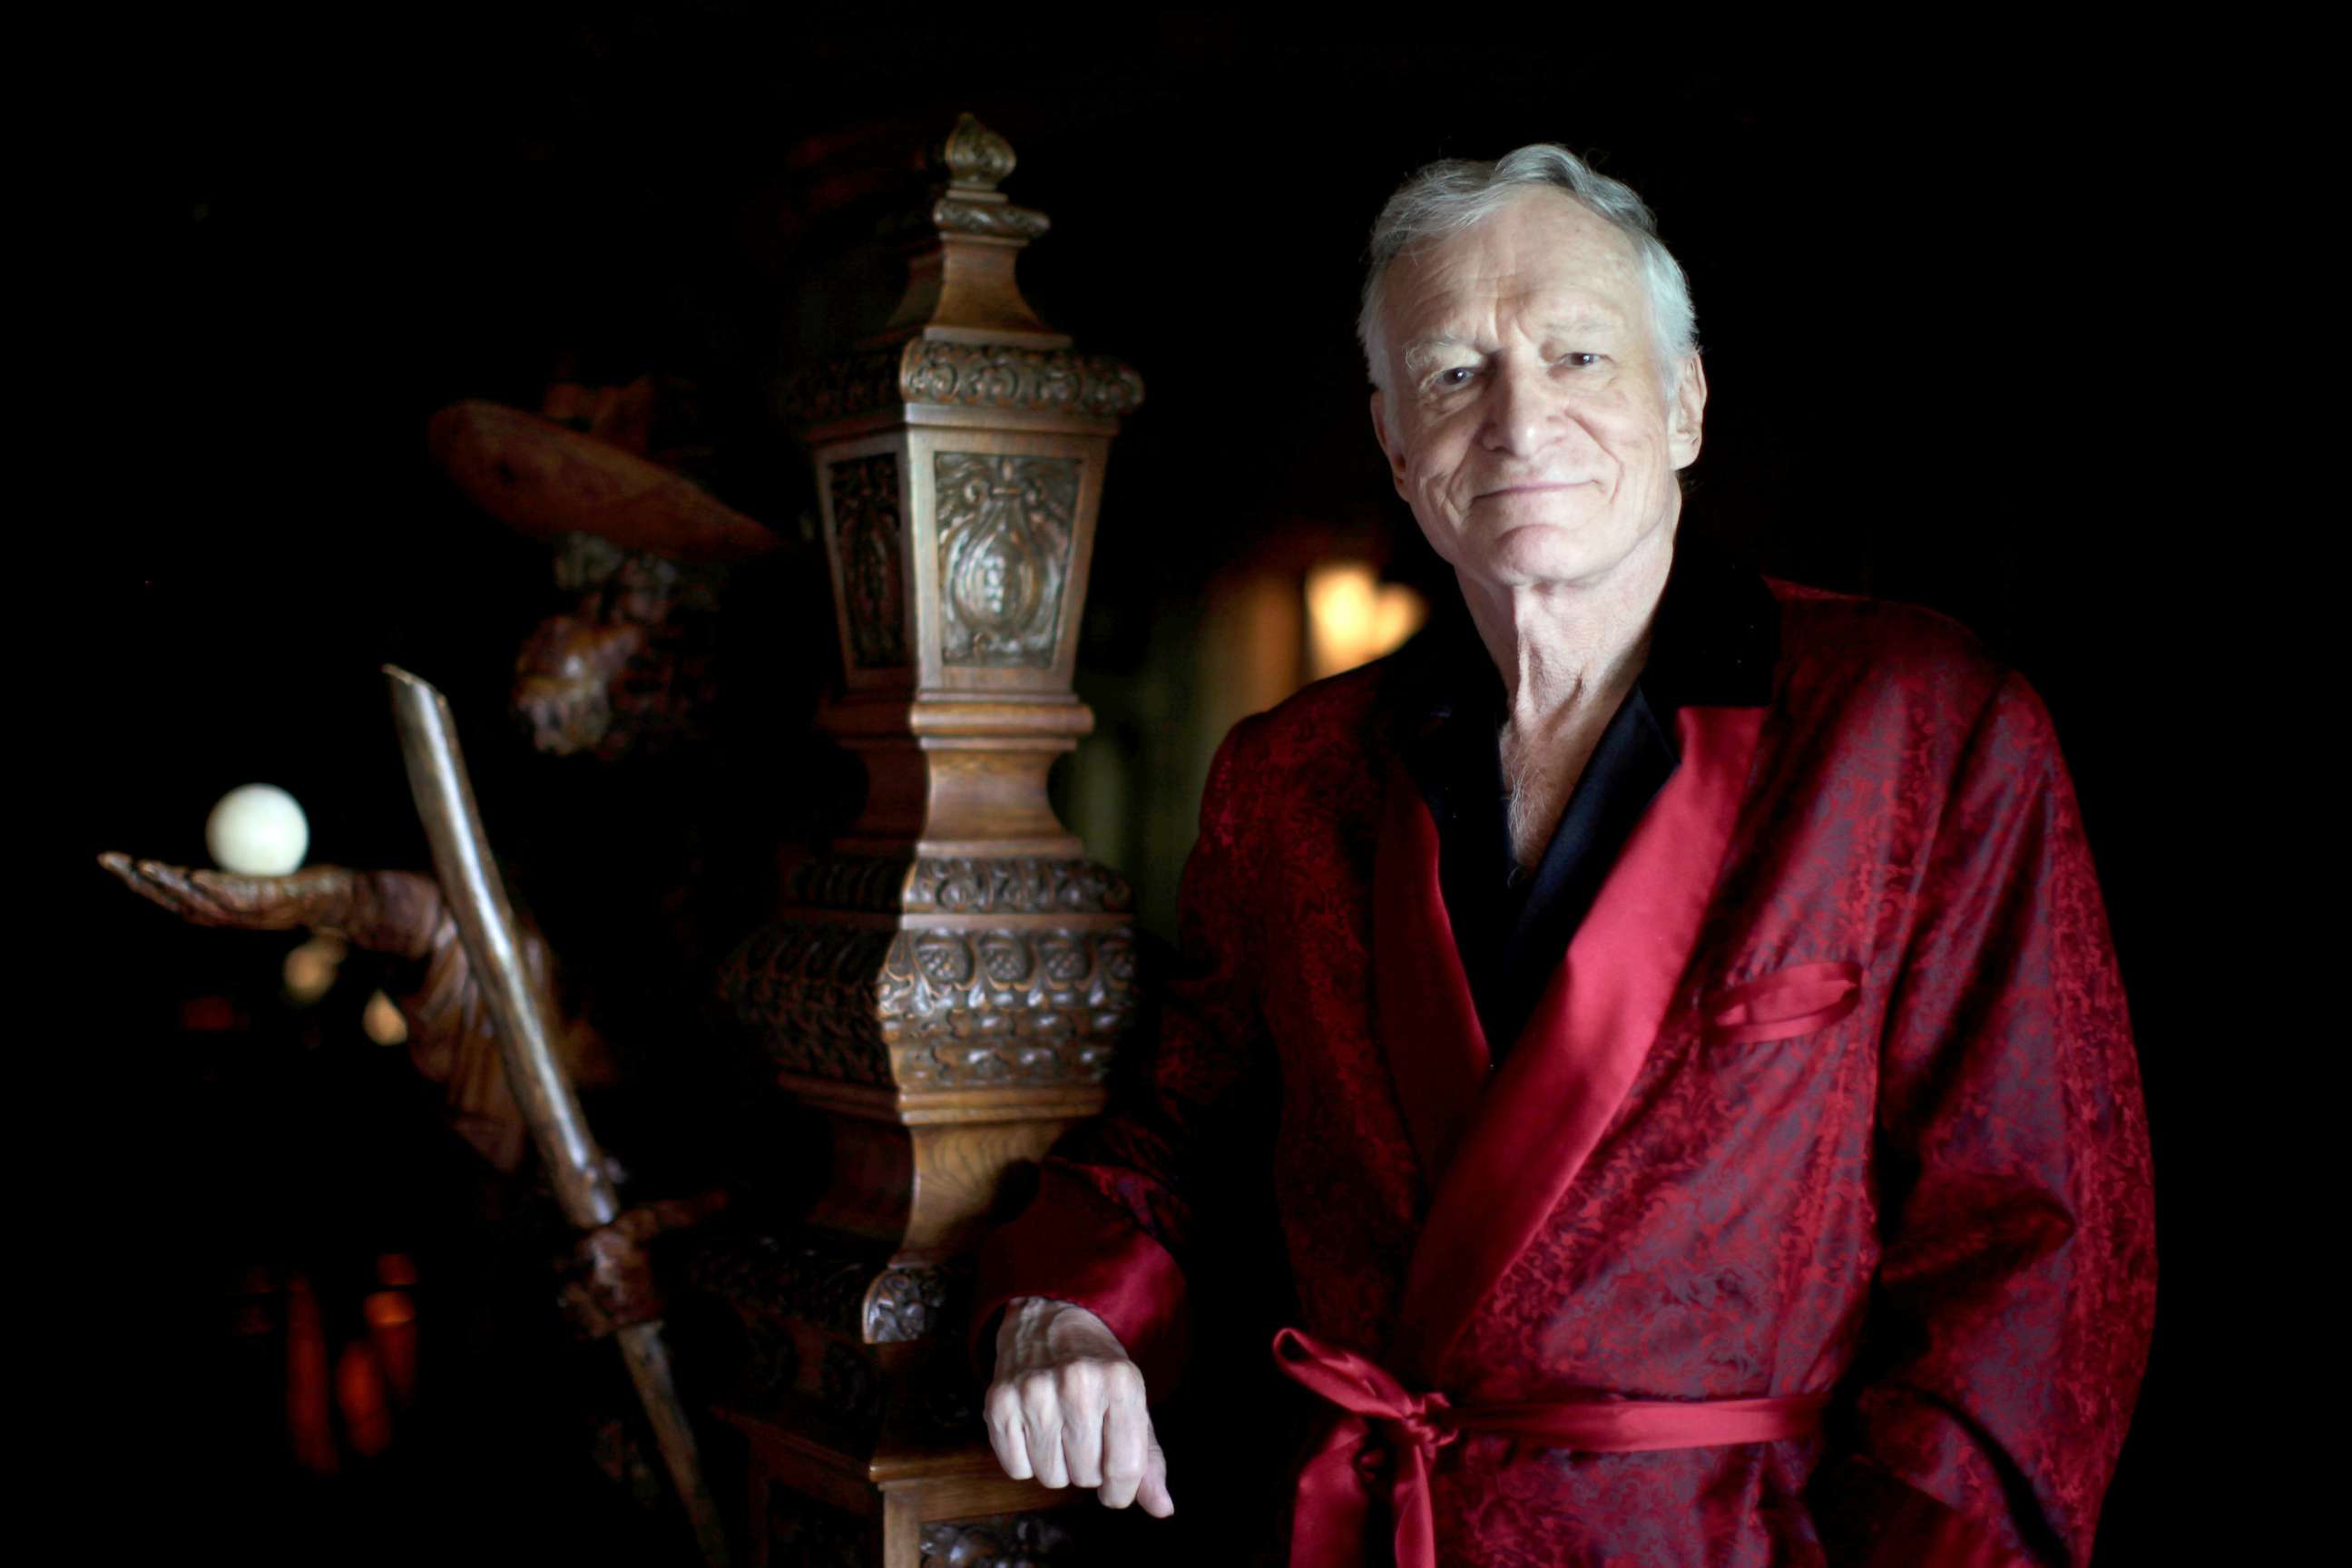 PHOTO: Playboy magazine founder Hugh Hefner poses for a portrait at his Playboy mansion in Los Angeles, July 27, 2010.